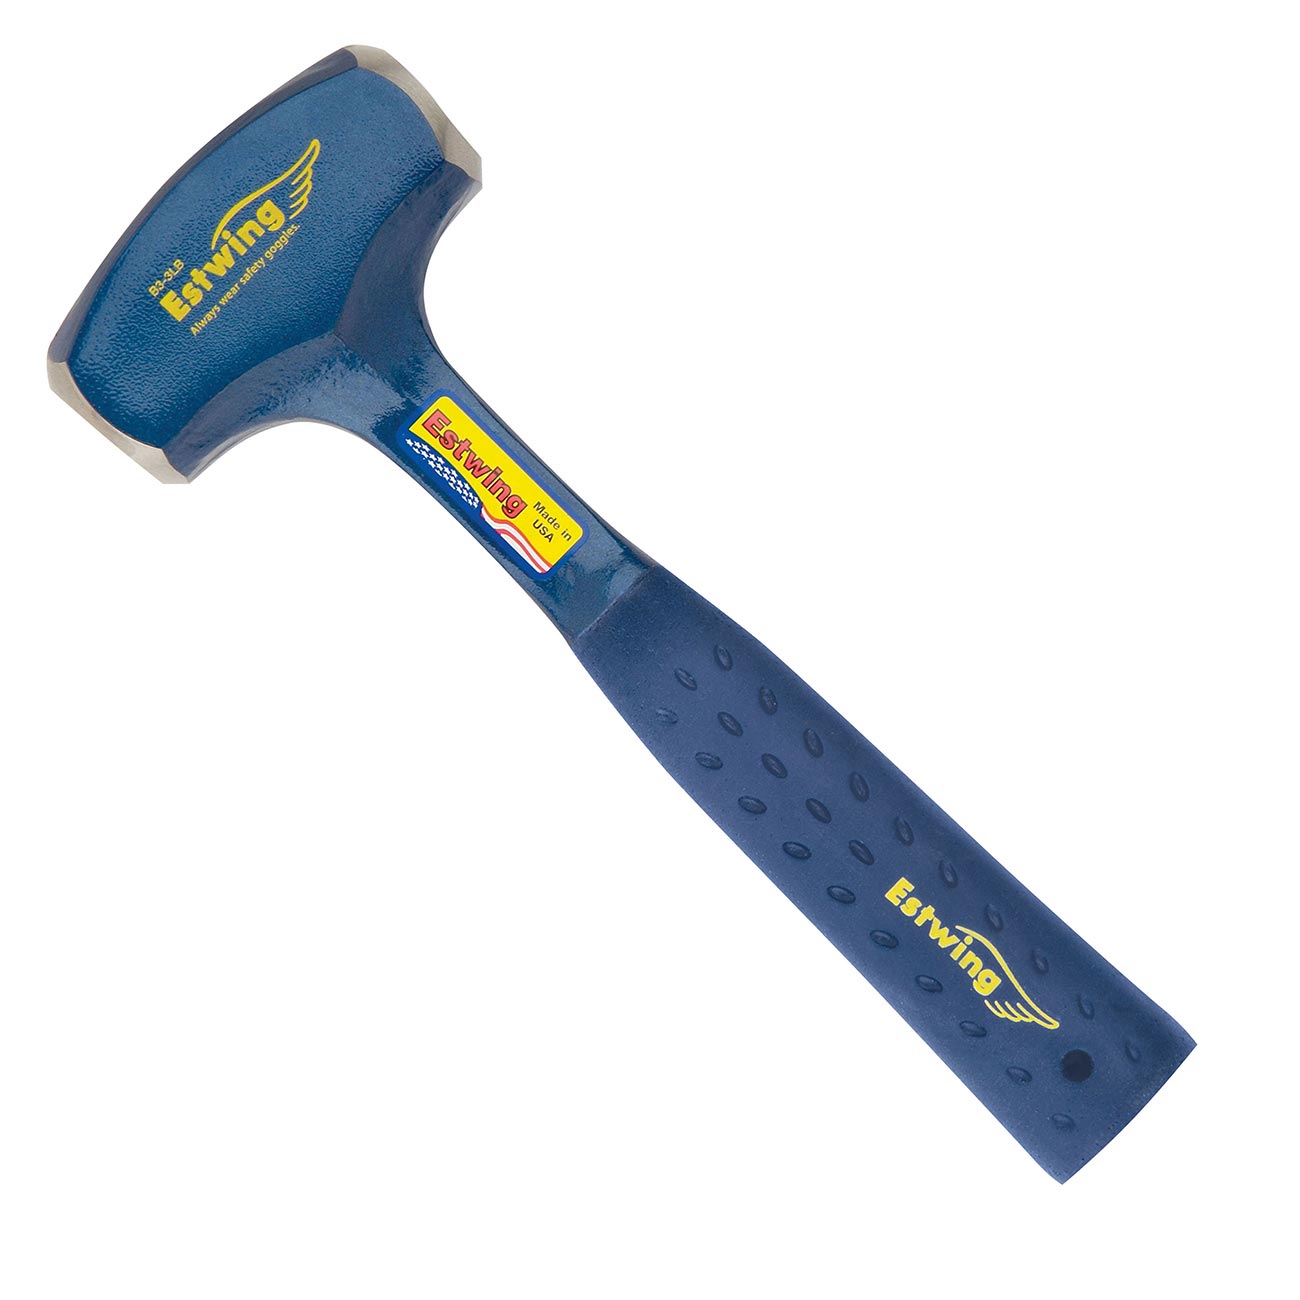 Estwing 3 lb. Solid Steel Drilling Hammer